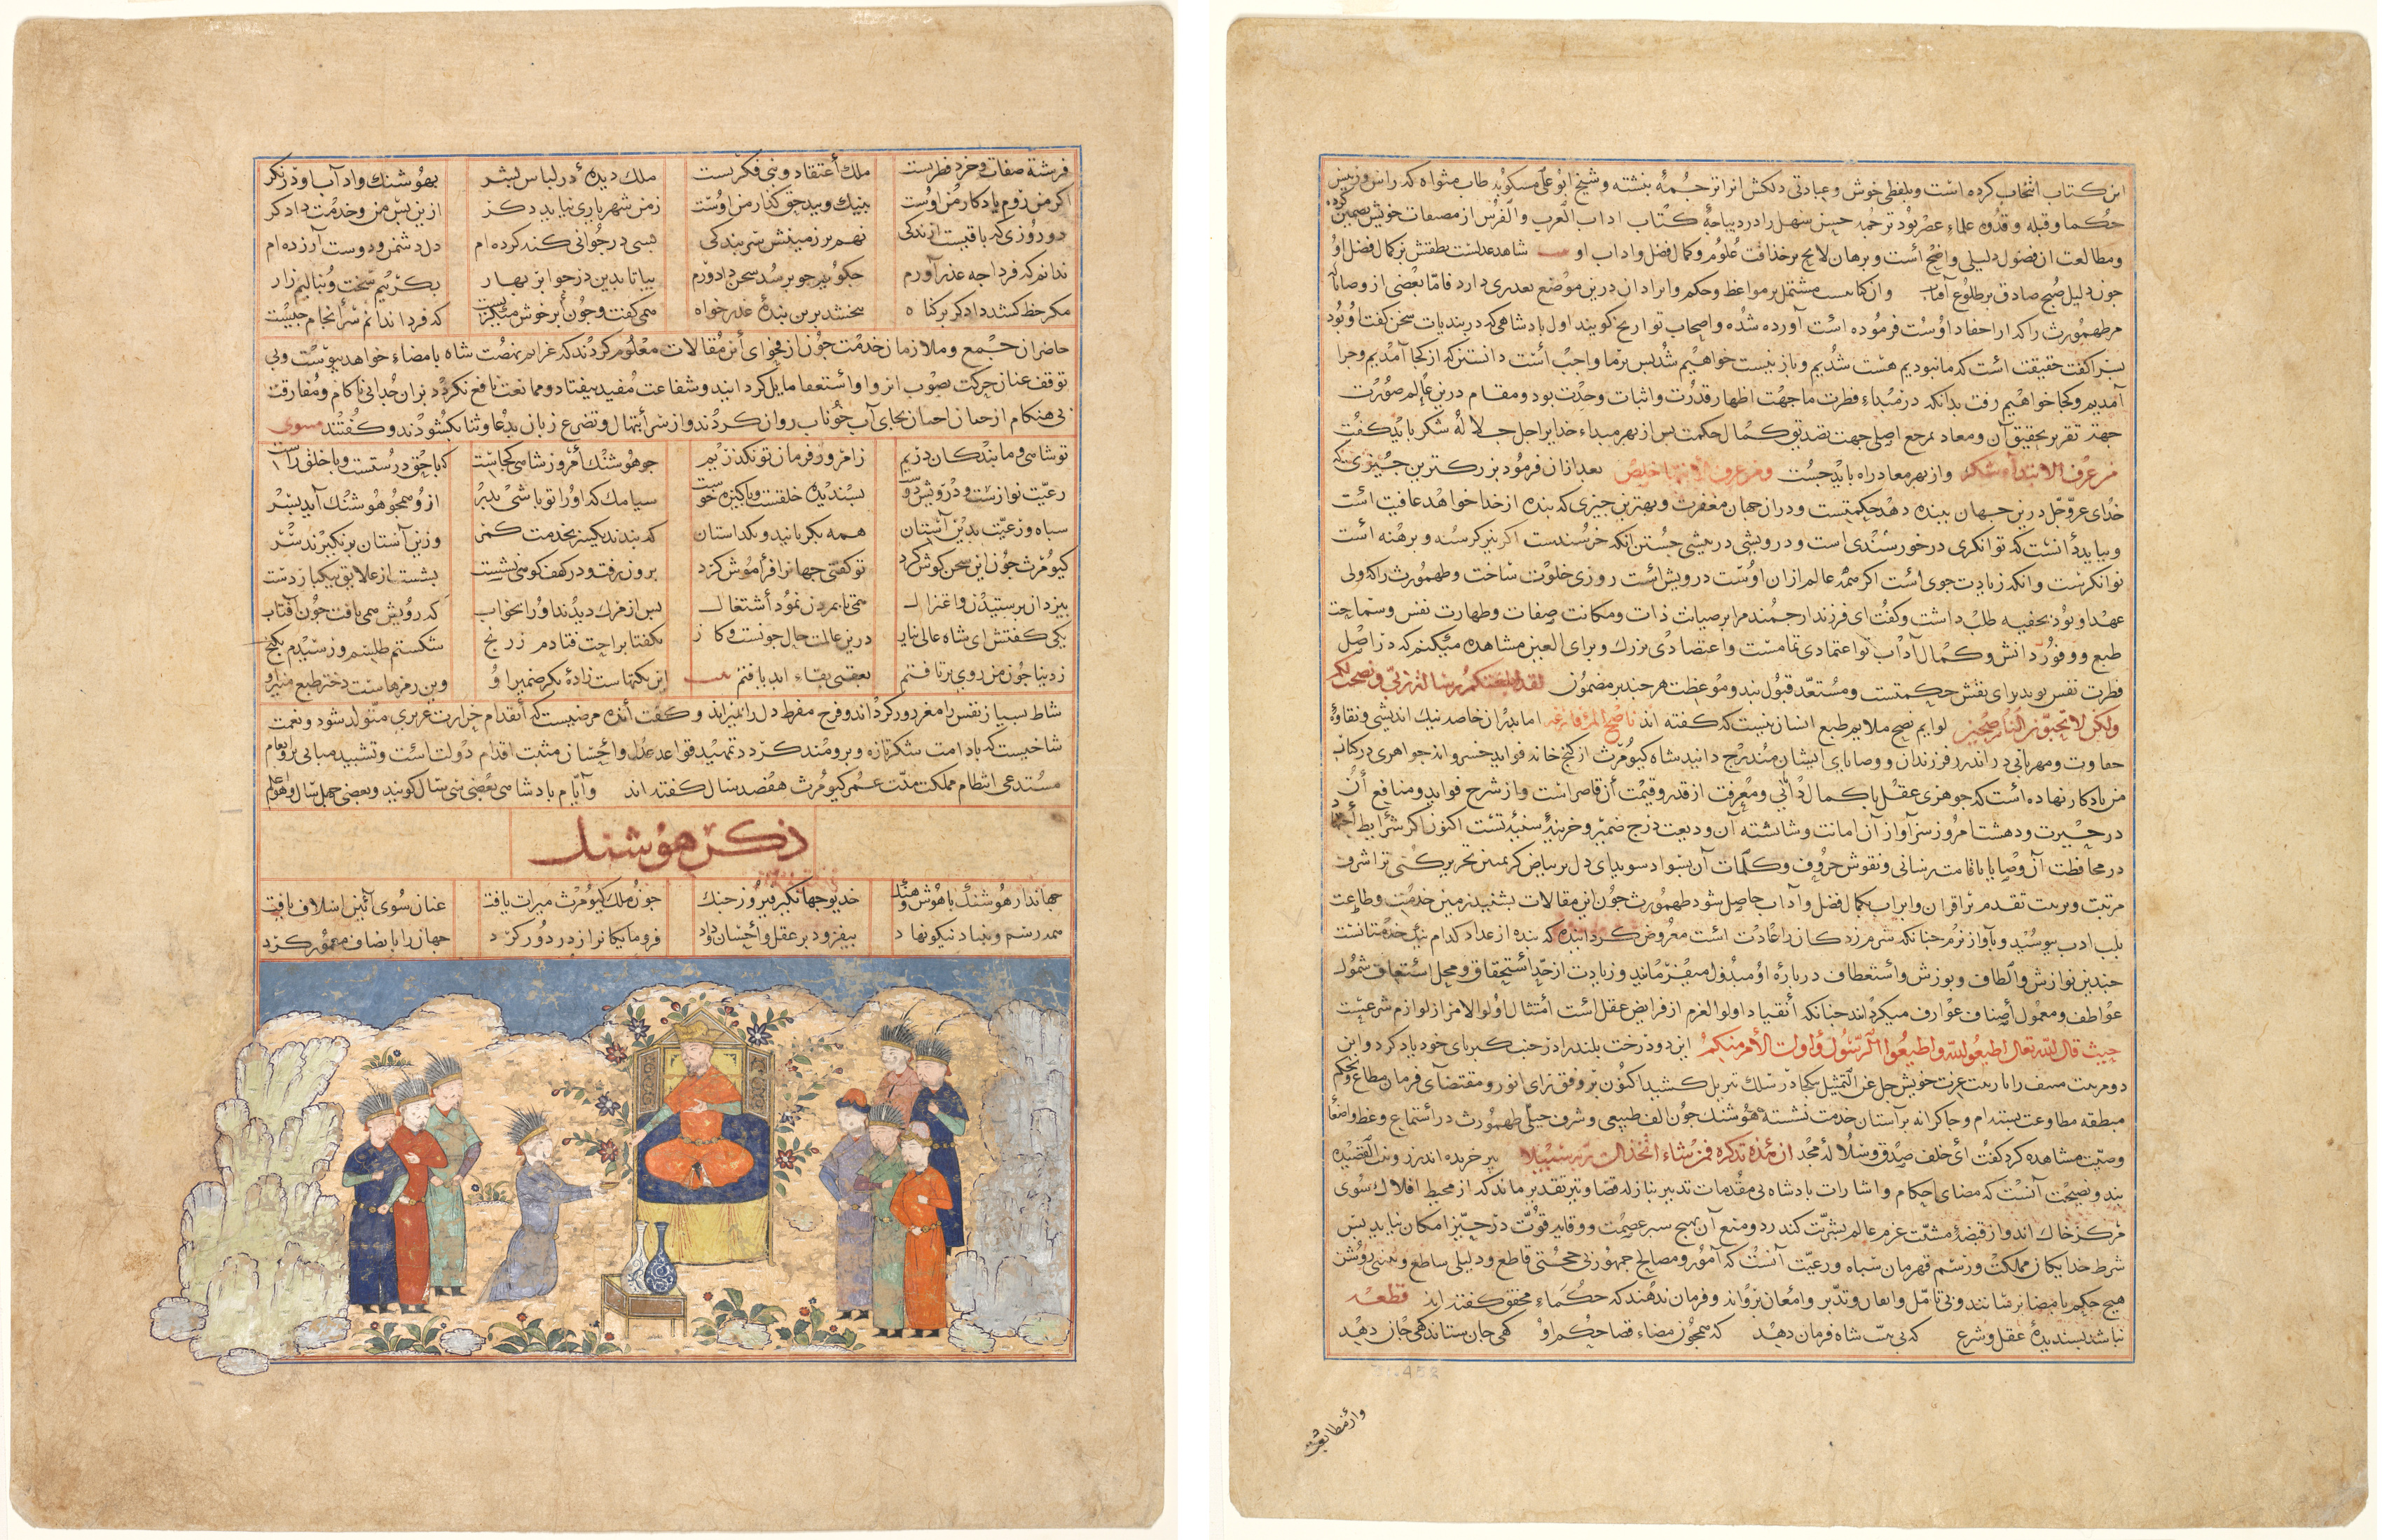 The Story of Hushang (recto),  Illustration and text (Persian Prose) from Majmac al-Tavarikh (A Compendium of Histories) of Hafiz-i Abru; Text Page, Persian Prose, (verso), from Majmac al-Tavarikh (A Compendium of Histories) of Hafiz-i Abru